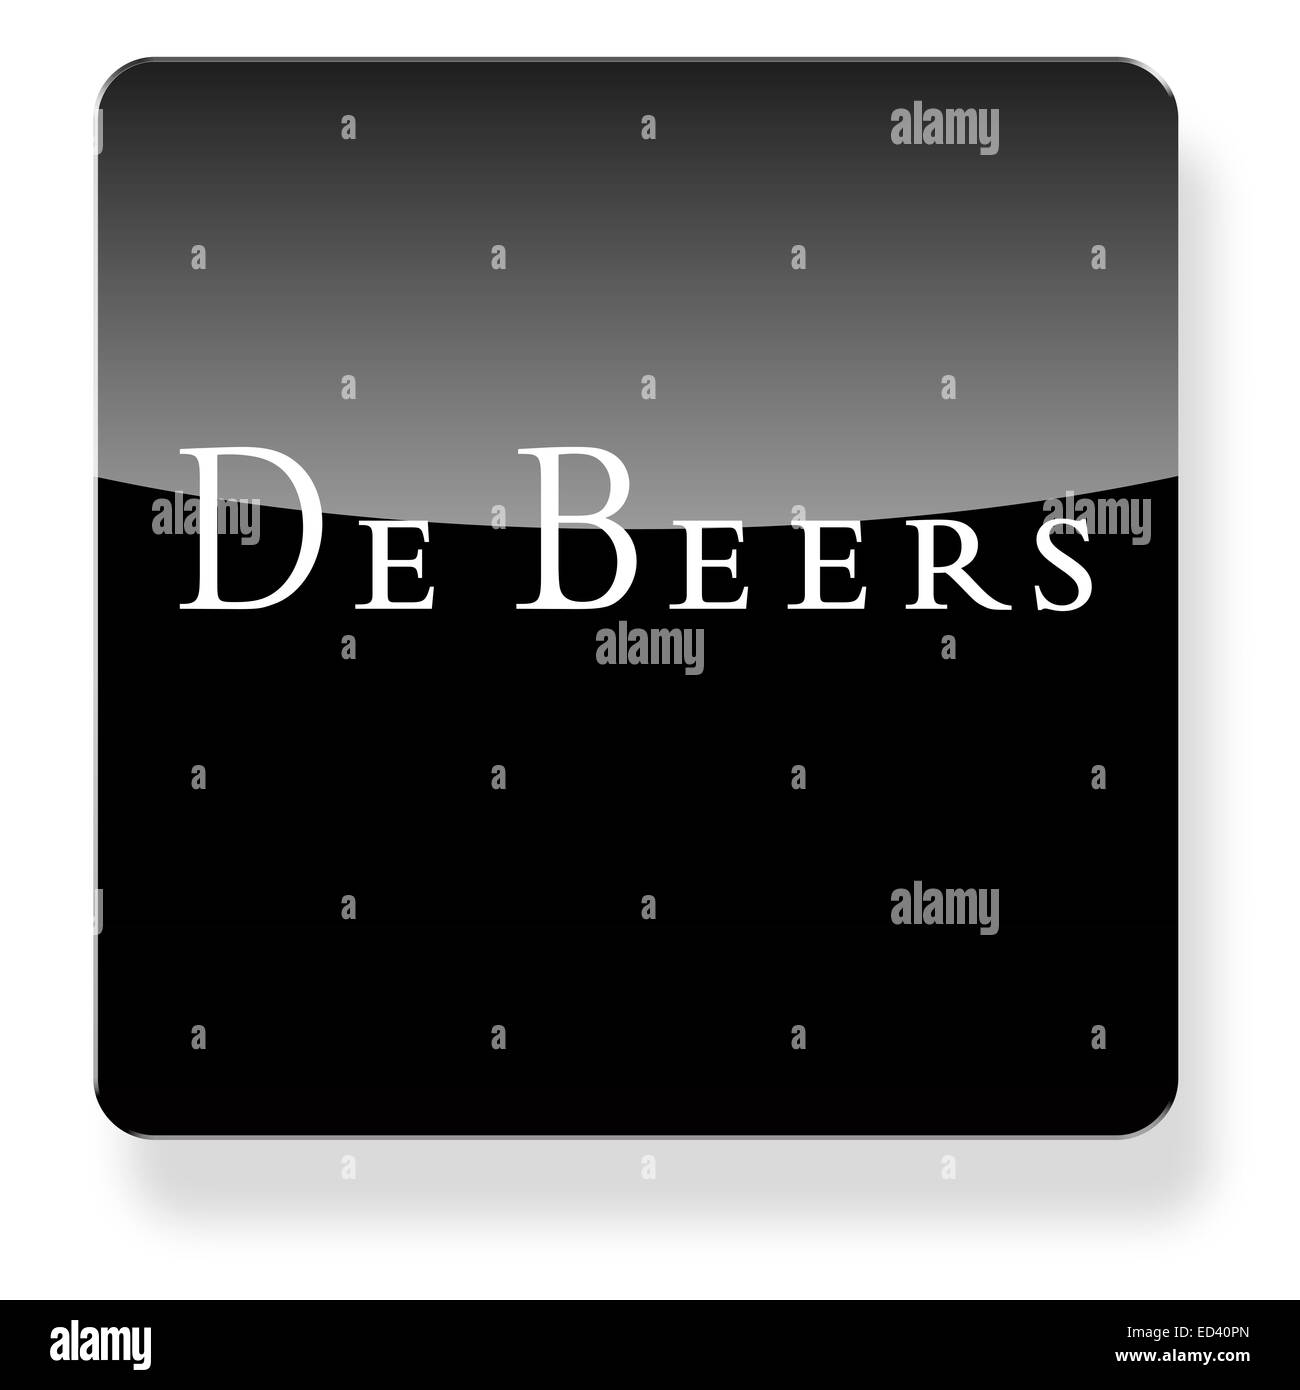 De Beers logo as an app icon. Clipping path included Stock Photo